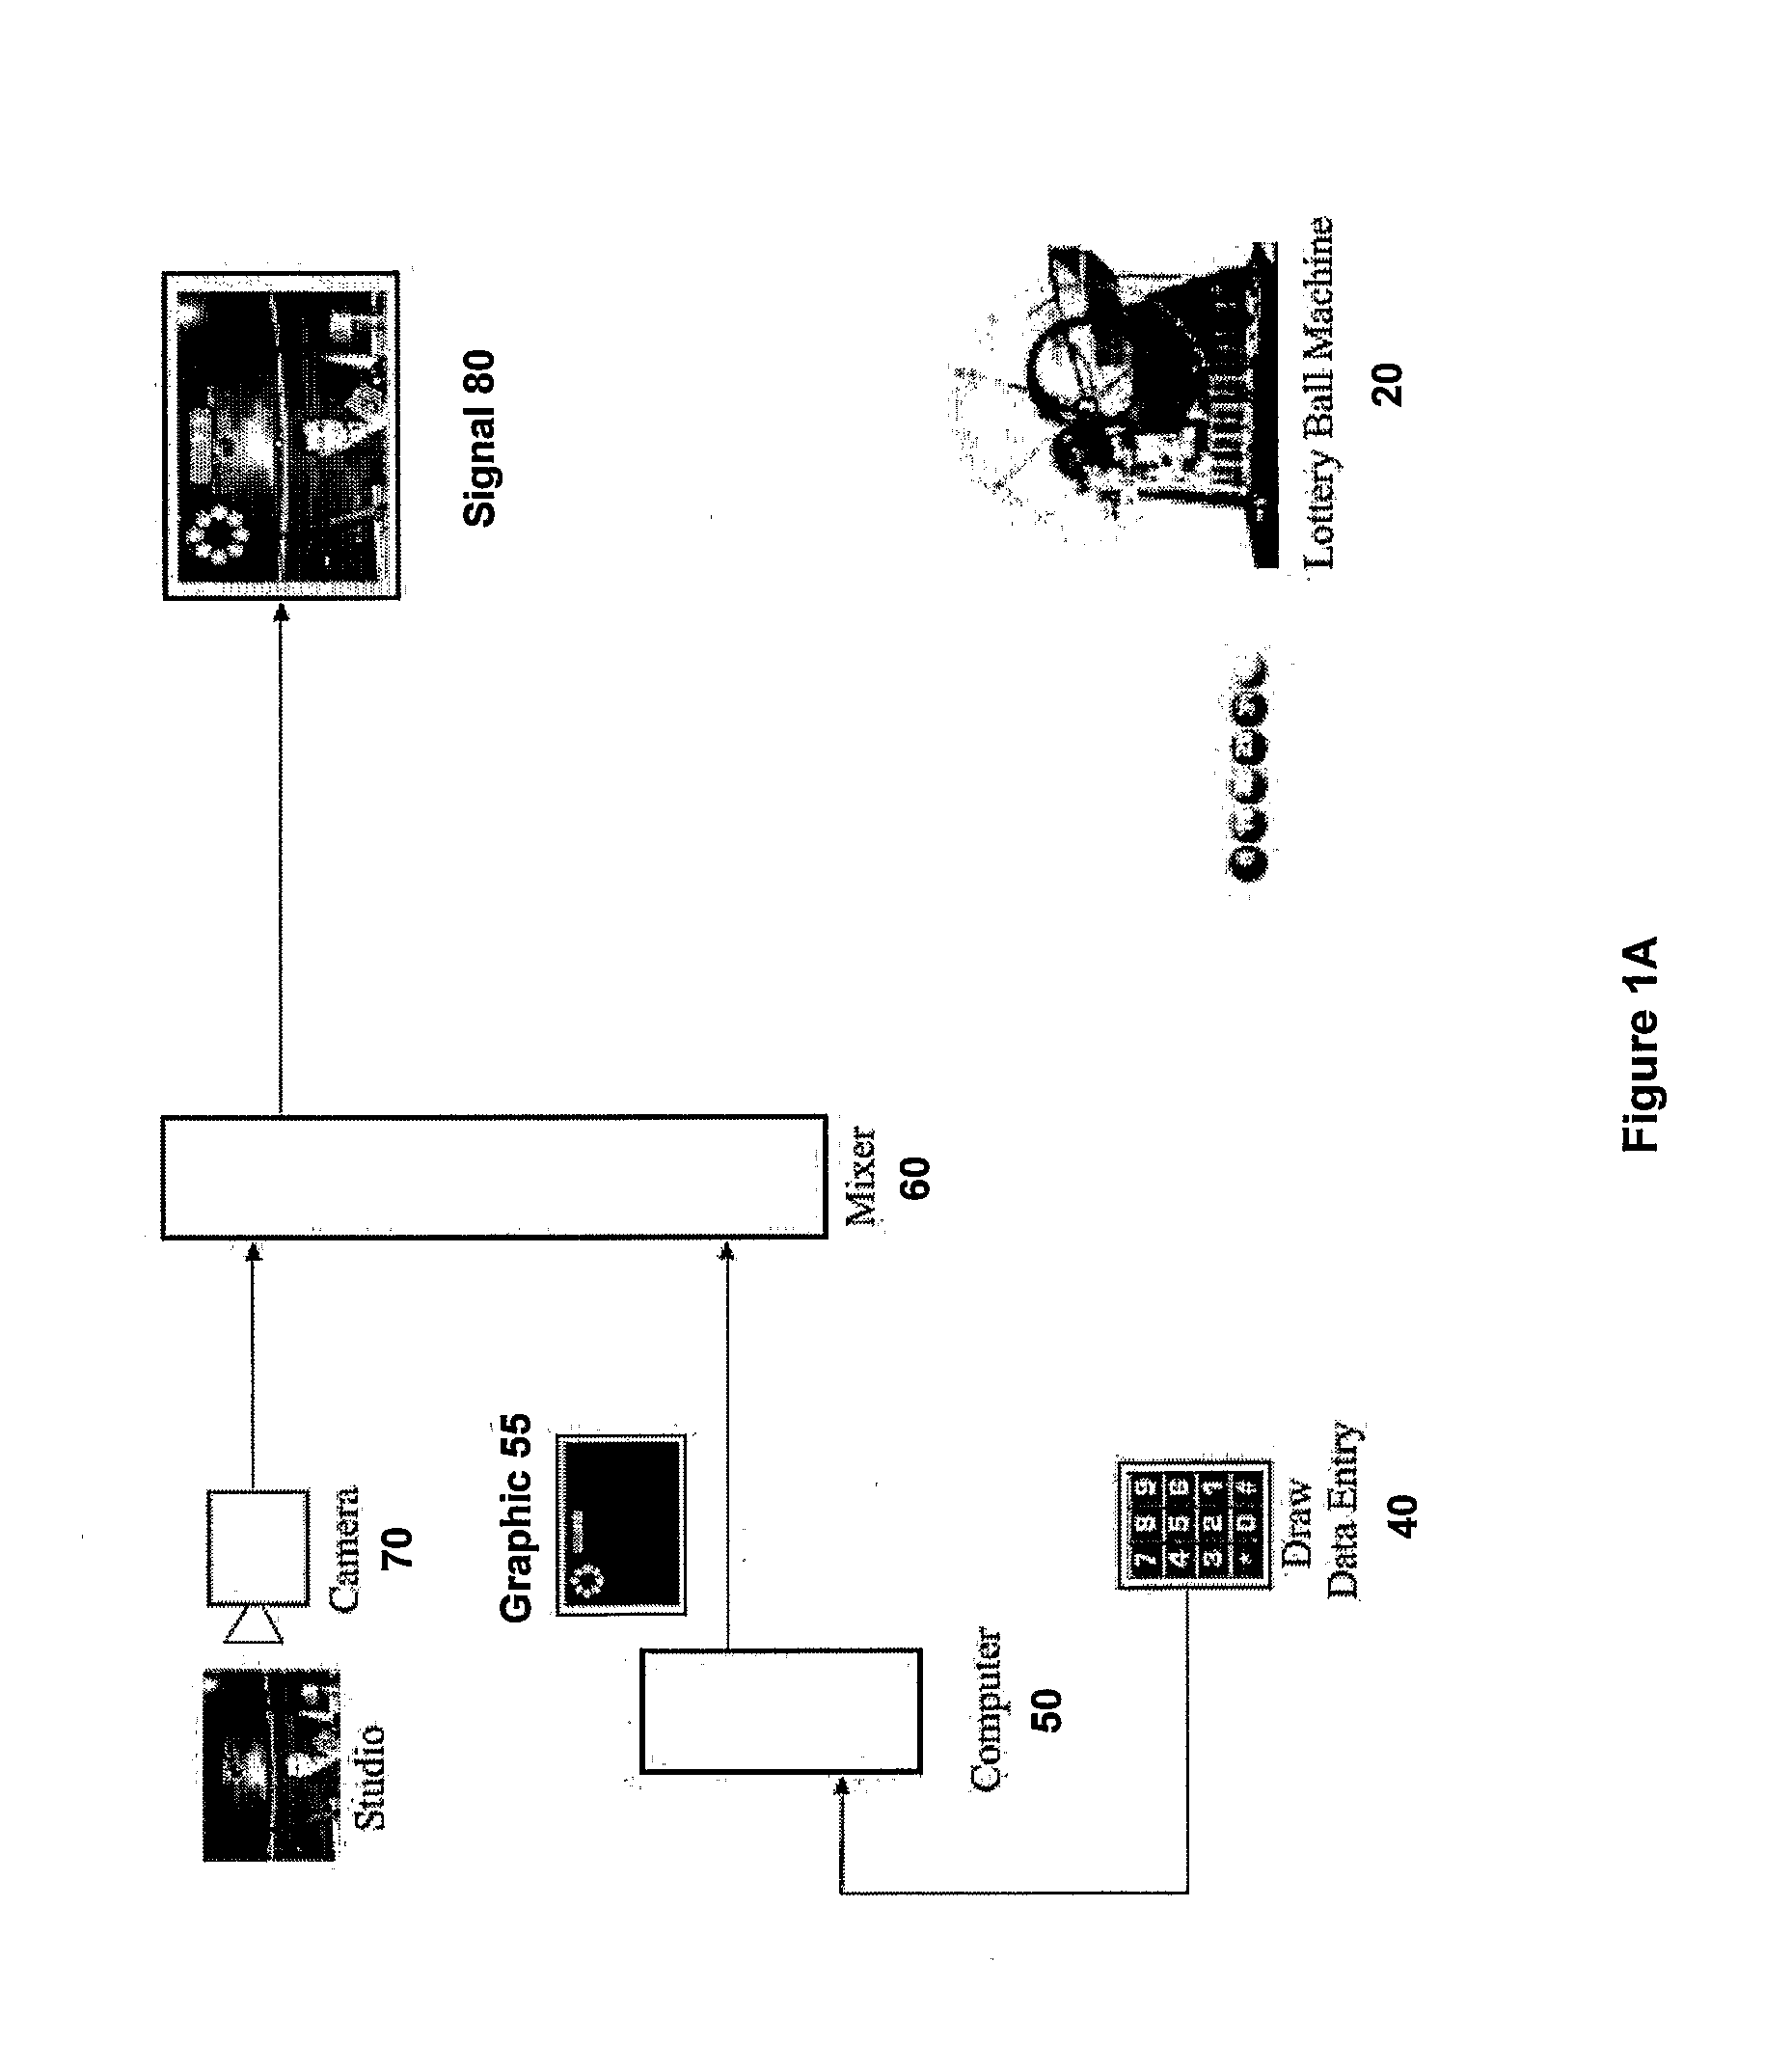 Apparatus and Method for Generating a Graphical Transformation of a Lottery Input Number